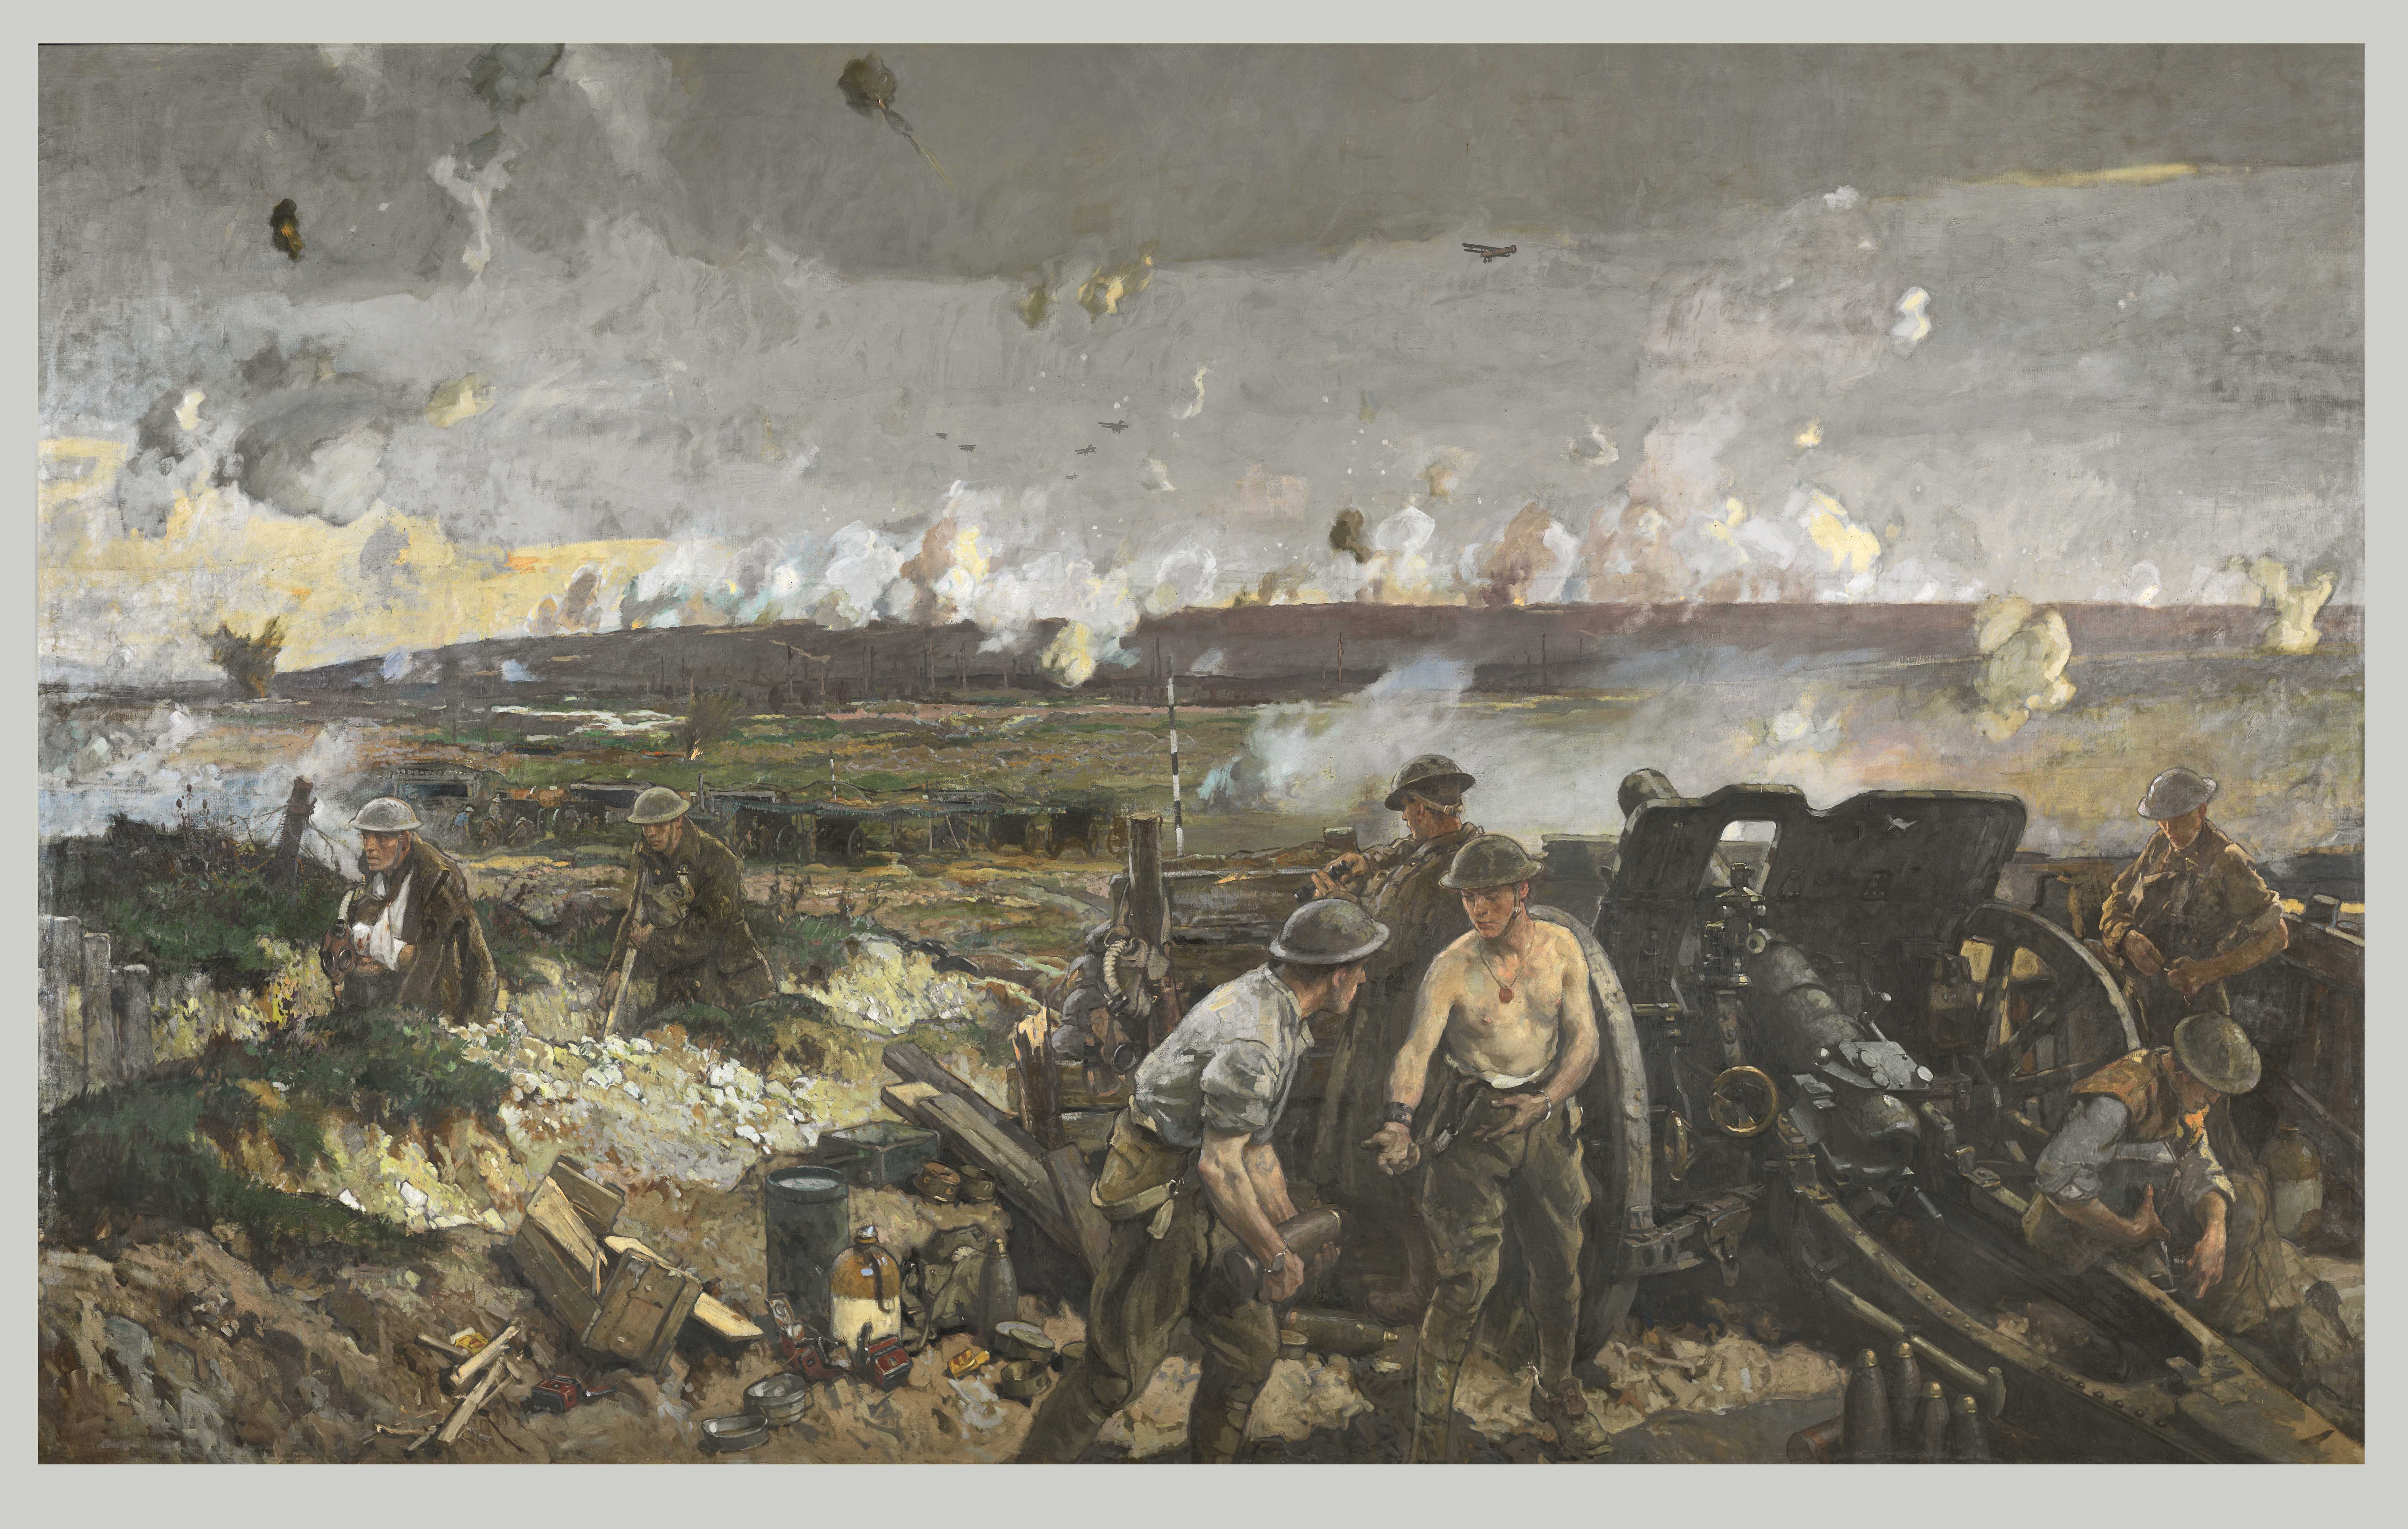 Painting. The sky is overcast and dotted with shells and smoke. Bottom centre: two men hand off large shells to load them in an artillery gun to the right. Other men, some wounded, make their way through trenches.